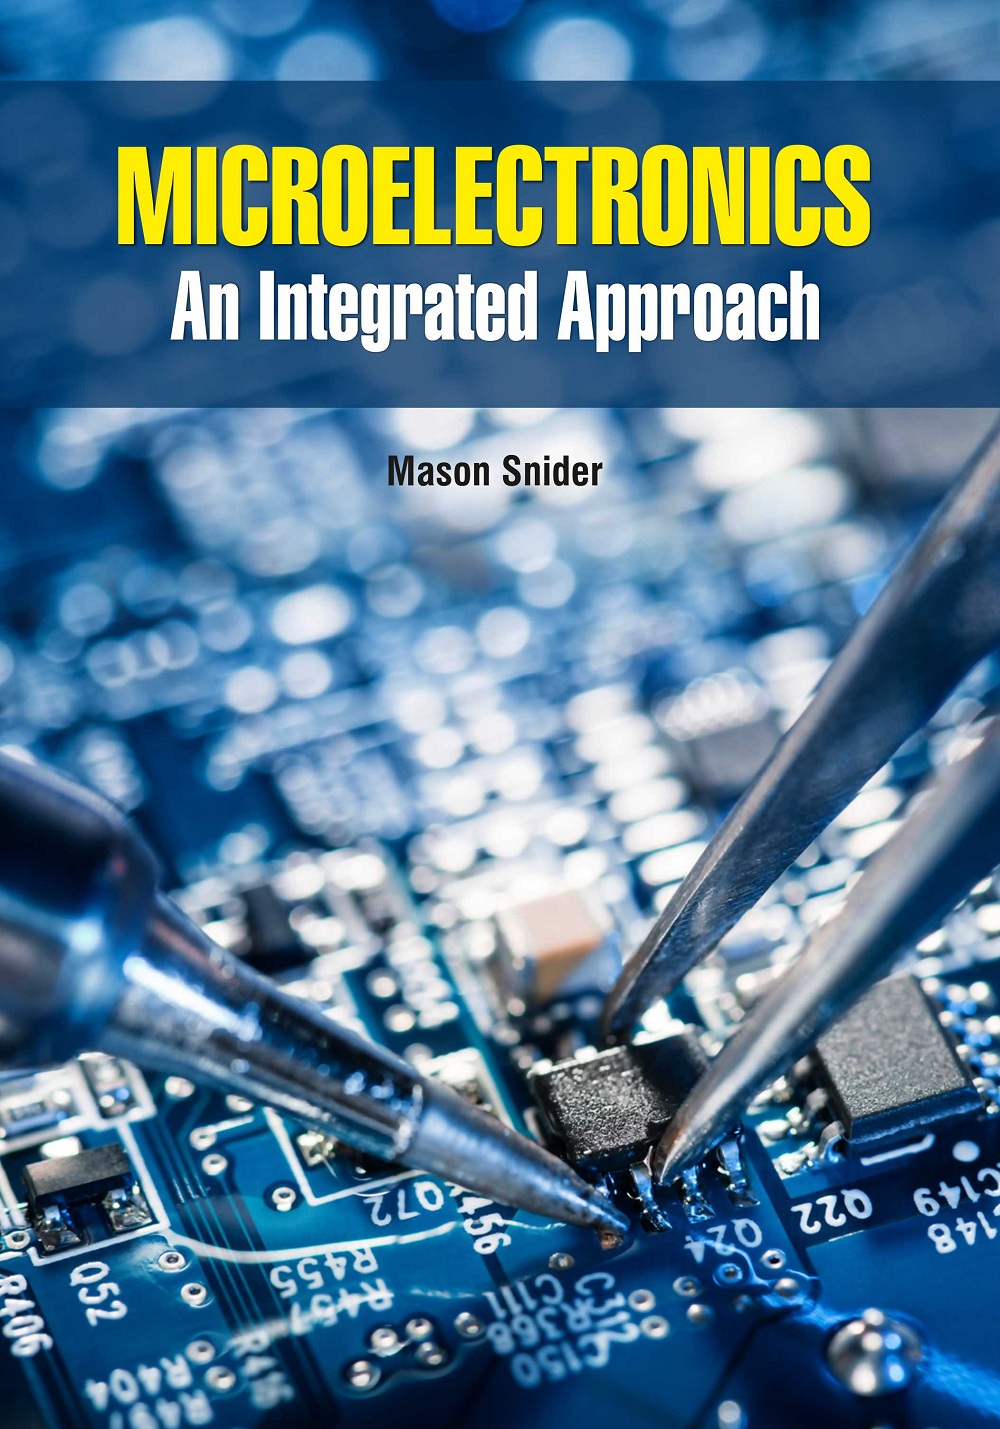 Microelectronics: An Integrated Approach